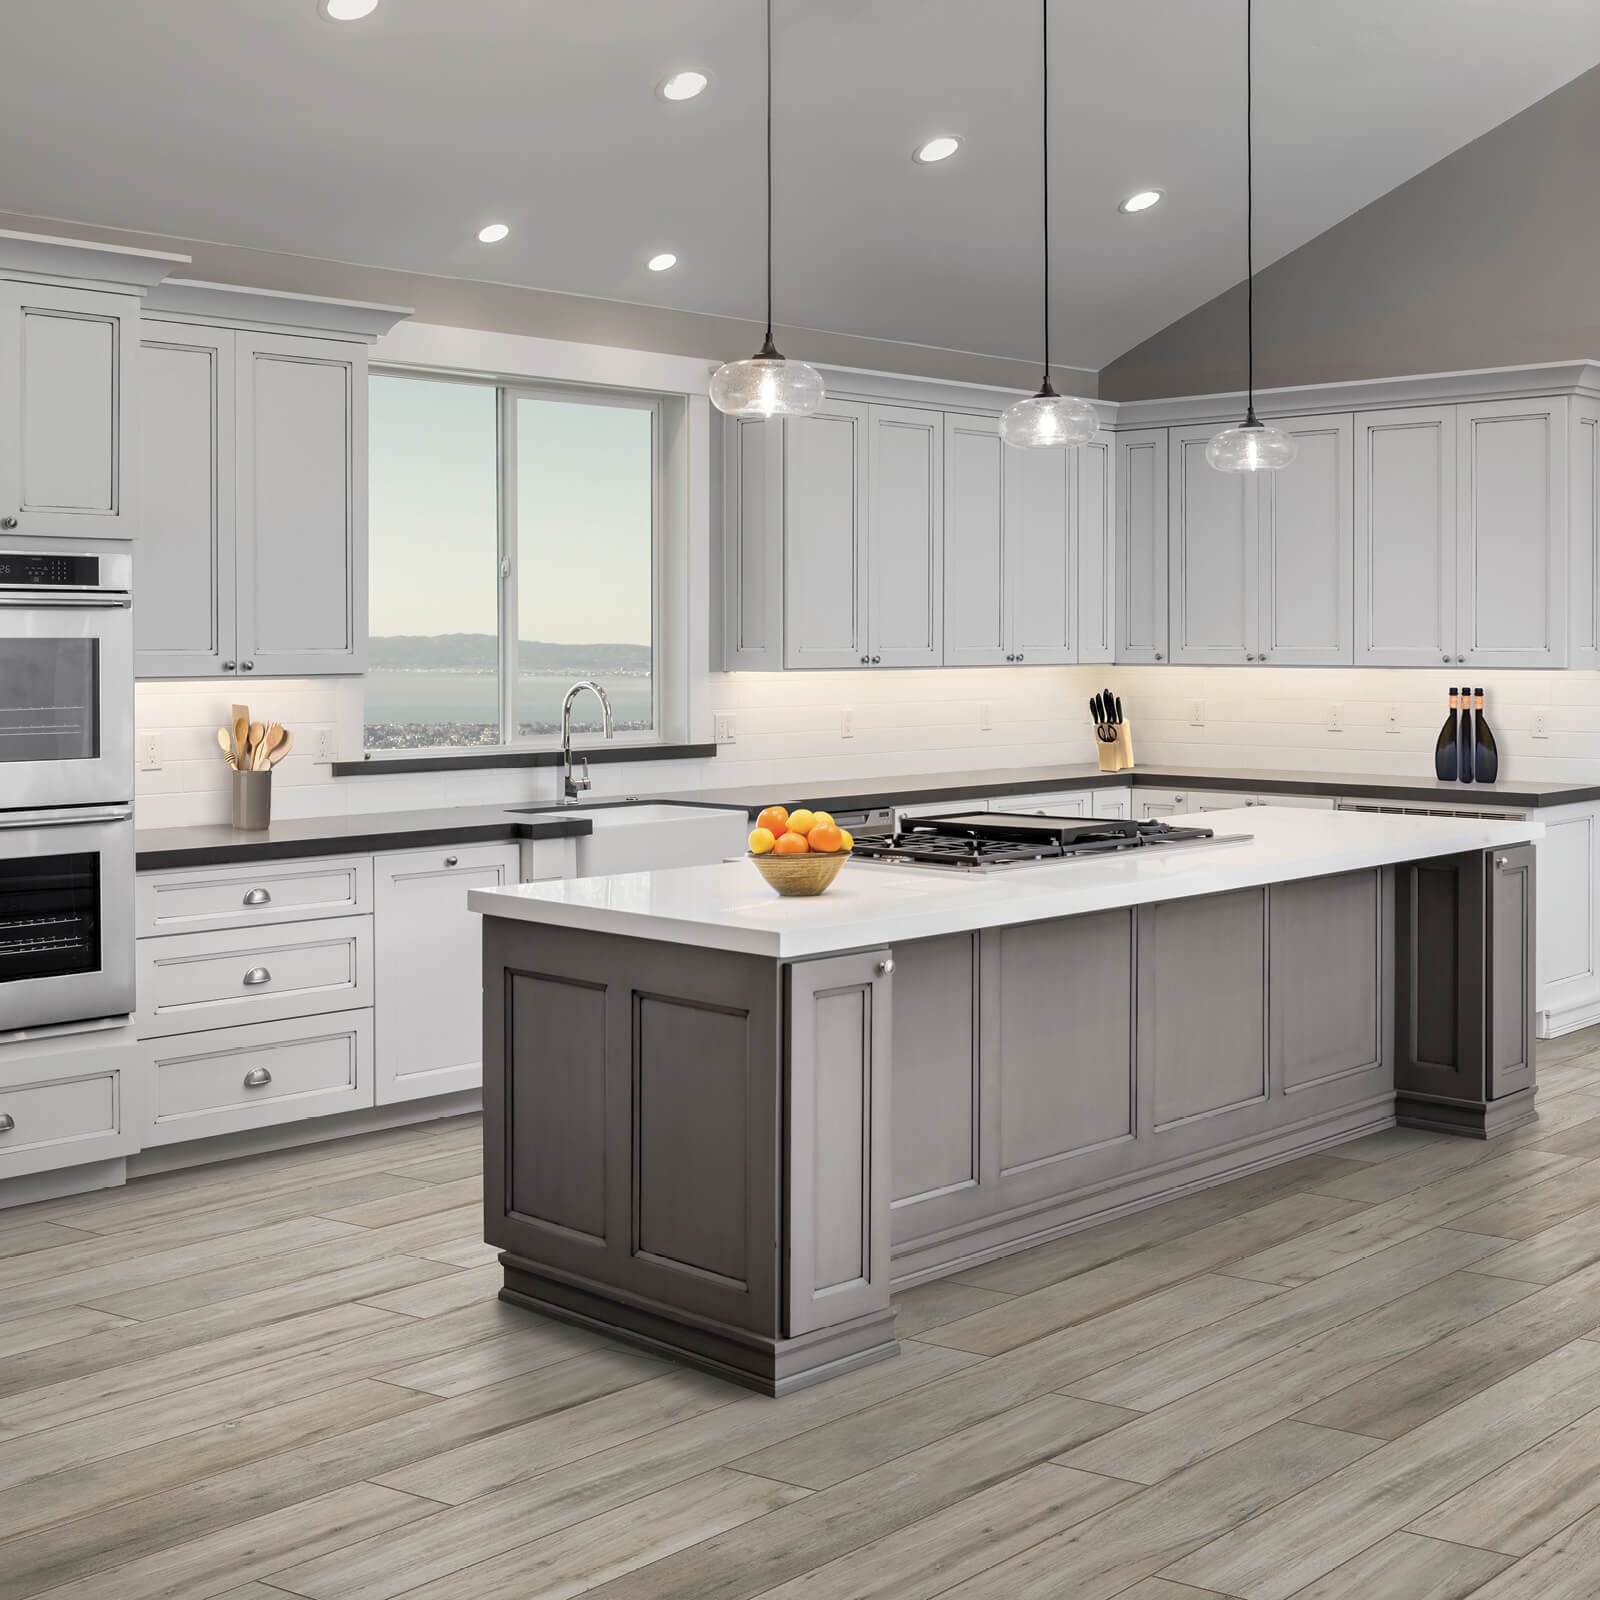 Cabinets & countertop | Affordable Floors